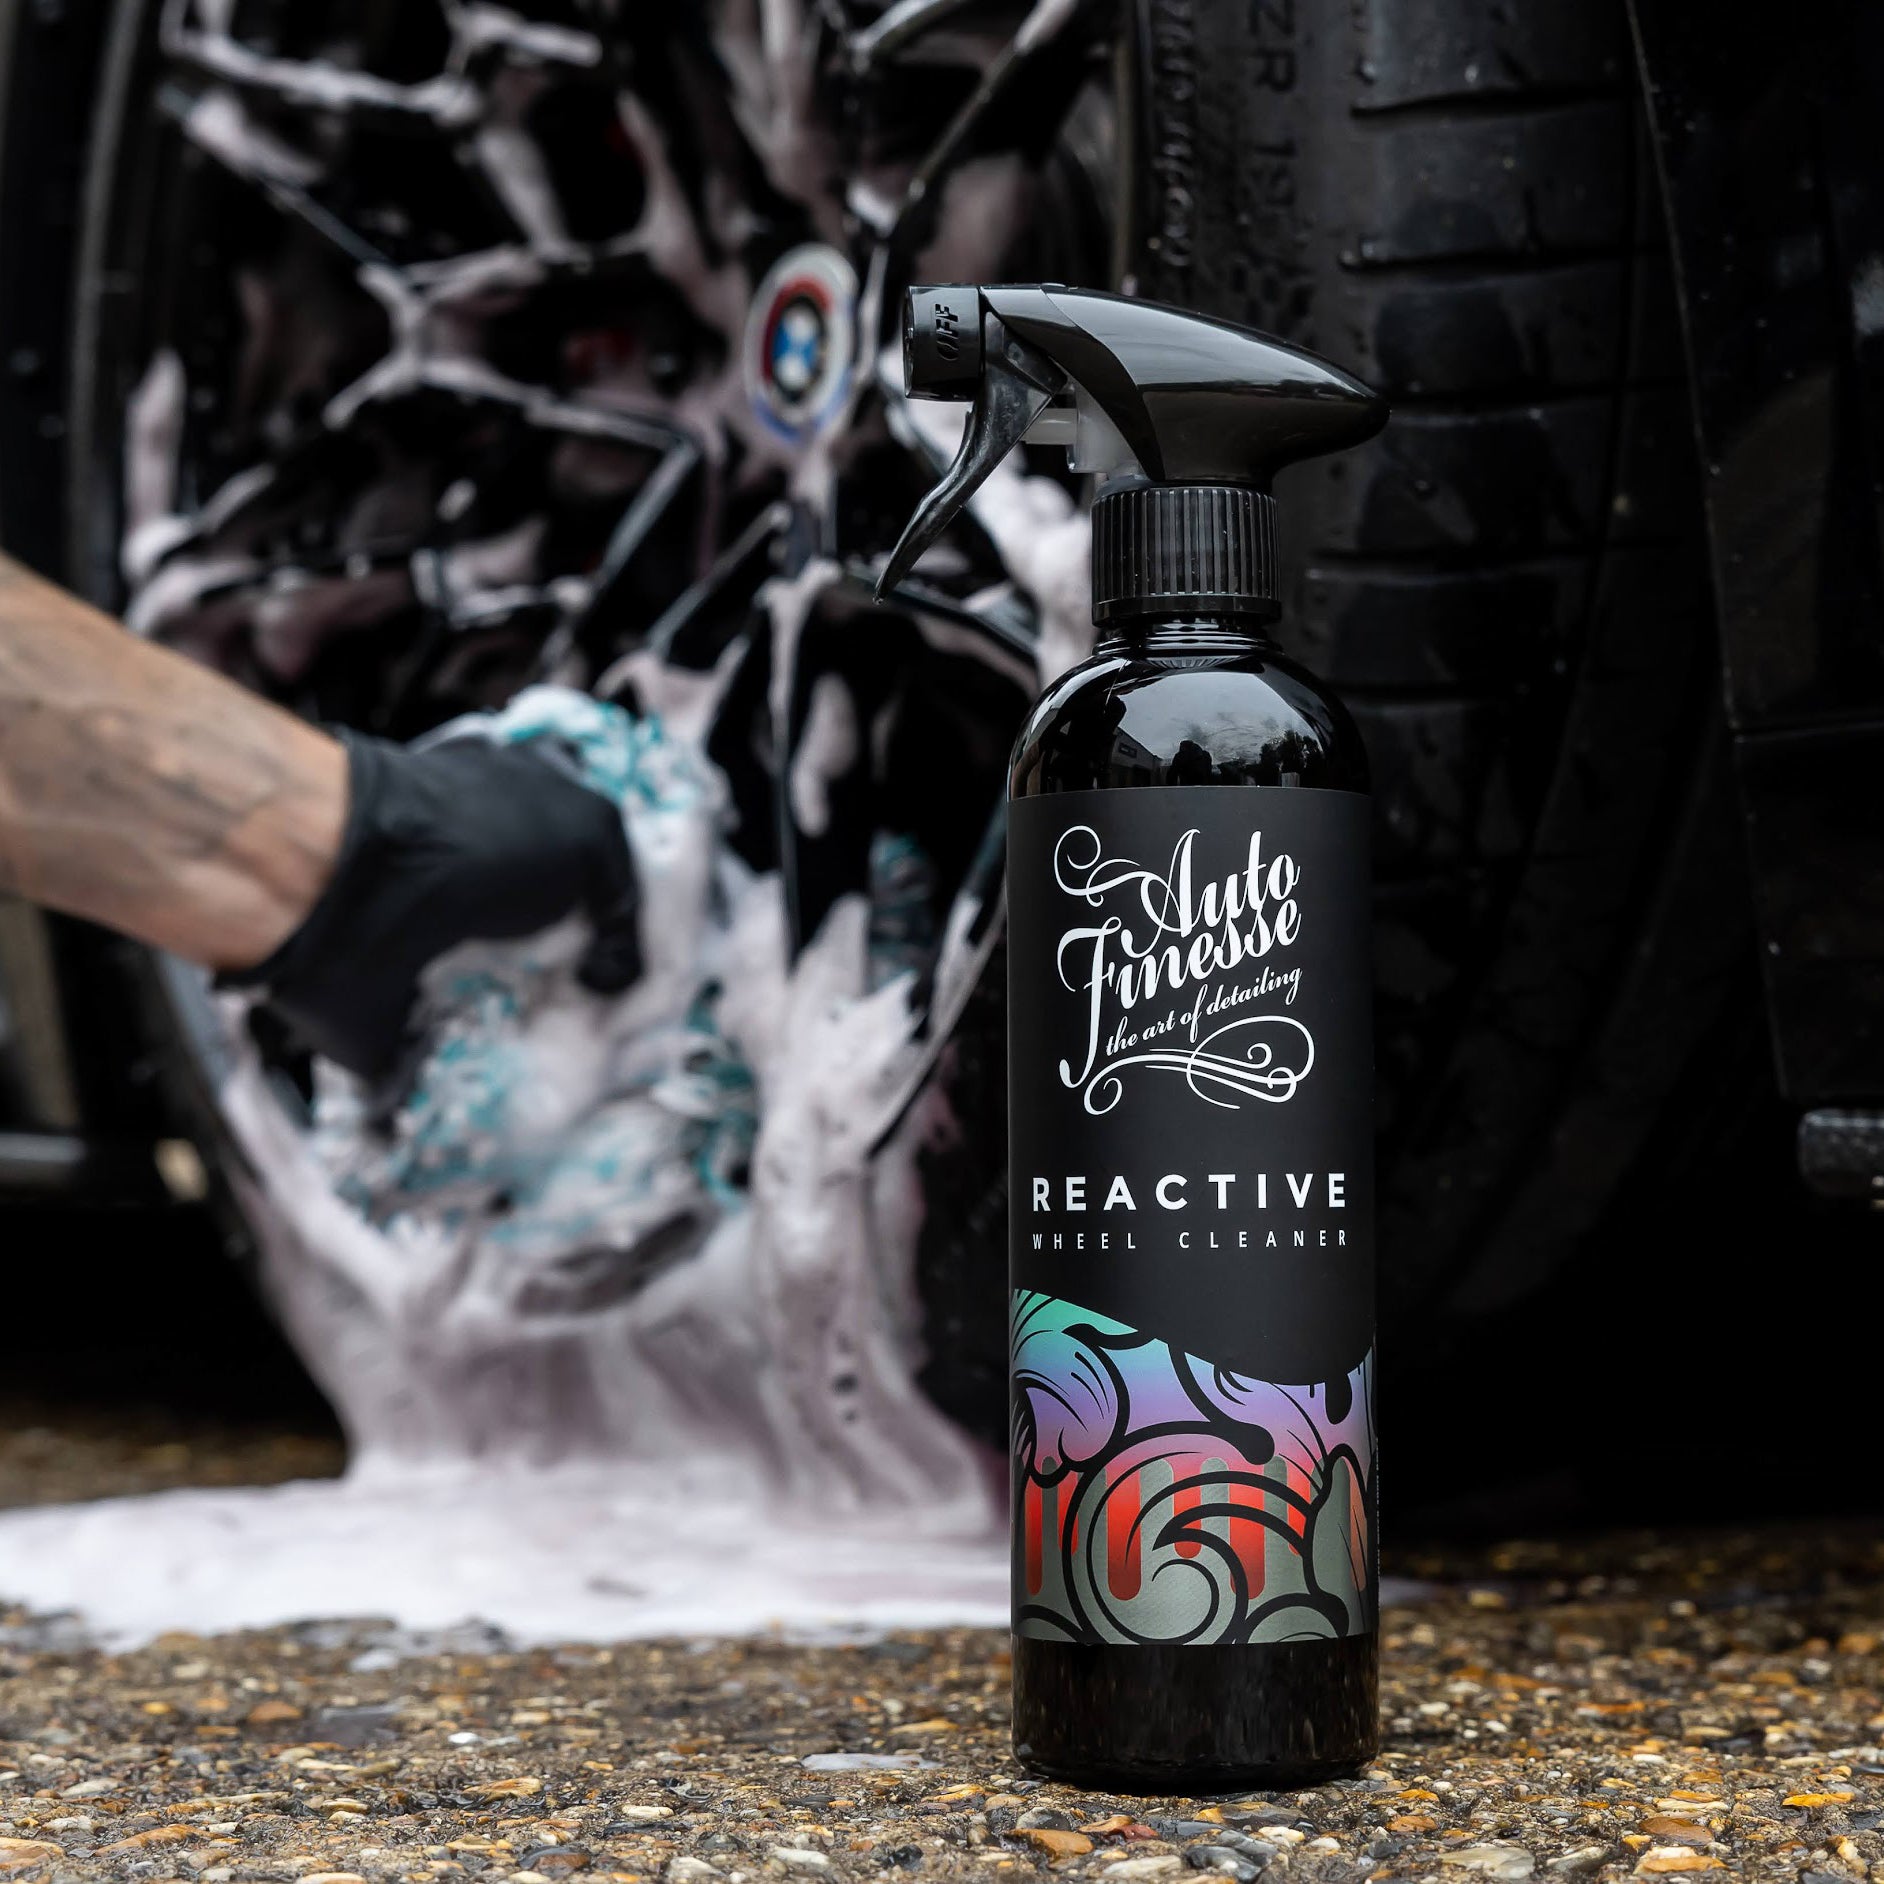 Auto Finesse | Car Detailing Products | Reactive